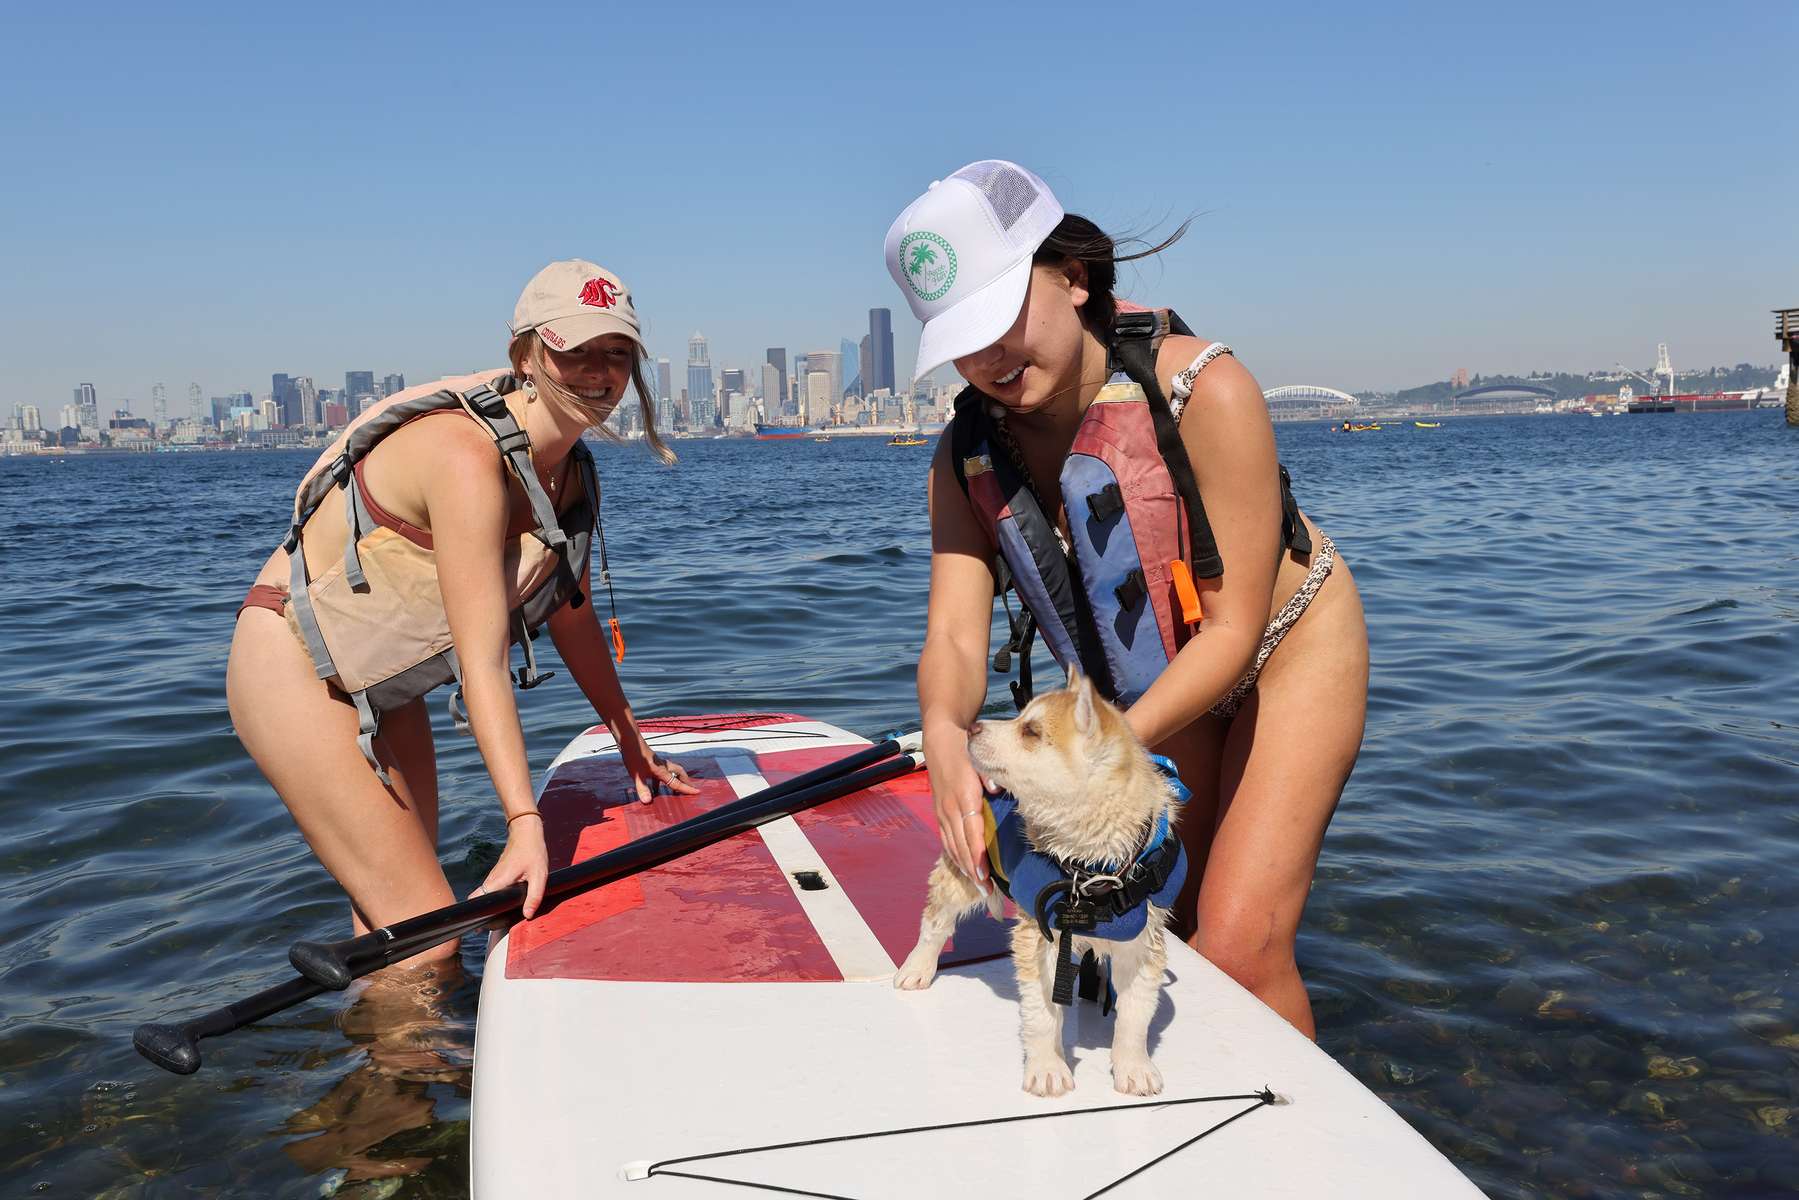 Mei Vandervelde (R) and Dayne Smith take their Husky puppy dog wearing a life vest out on a paddleboard in Elliott Bay during a heat wave in Seattle, Washington, U.S., June 27, 2021. REUTERS/Karen Ducey